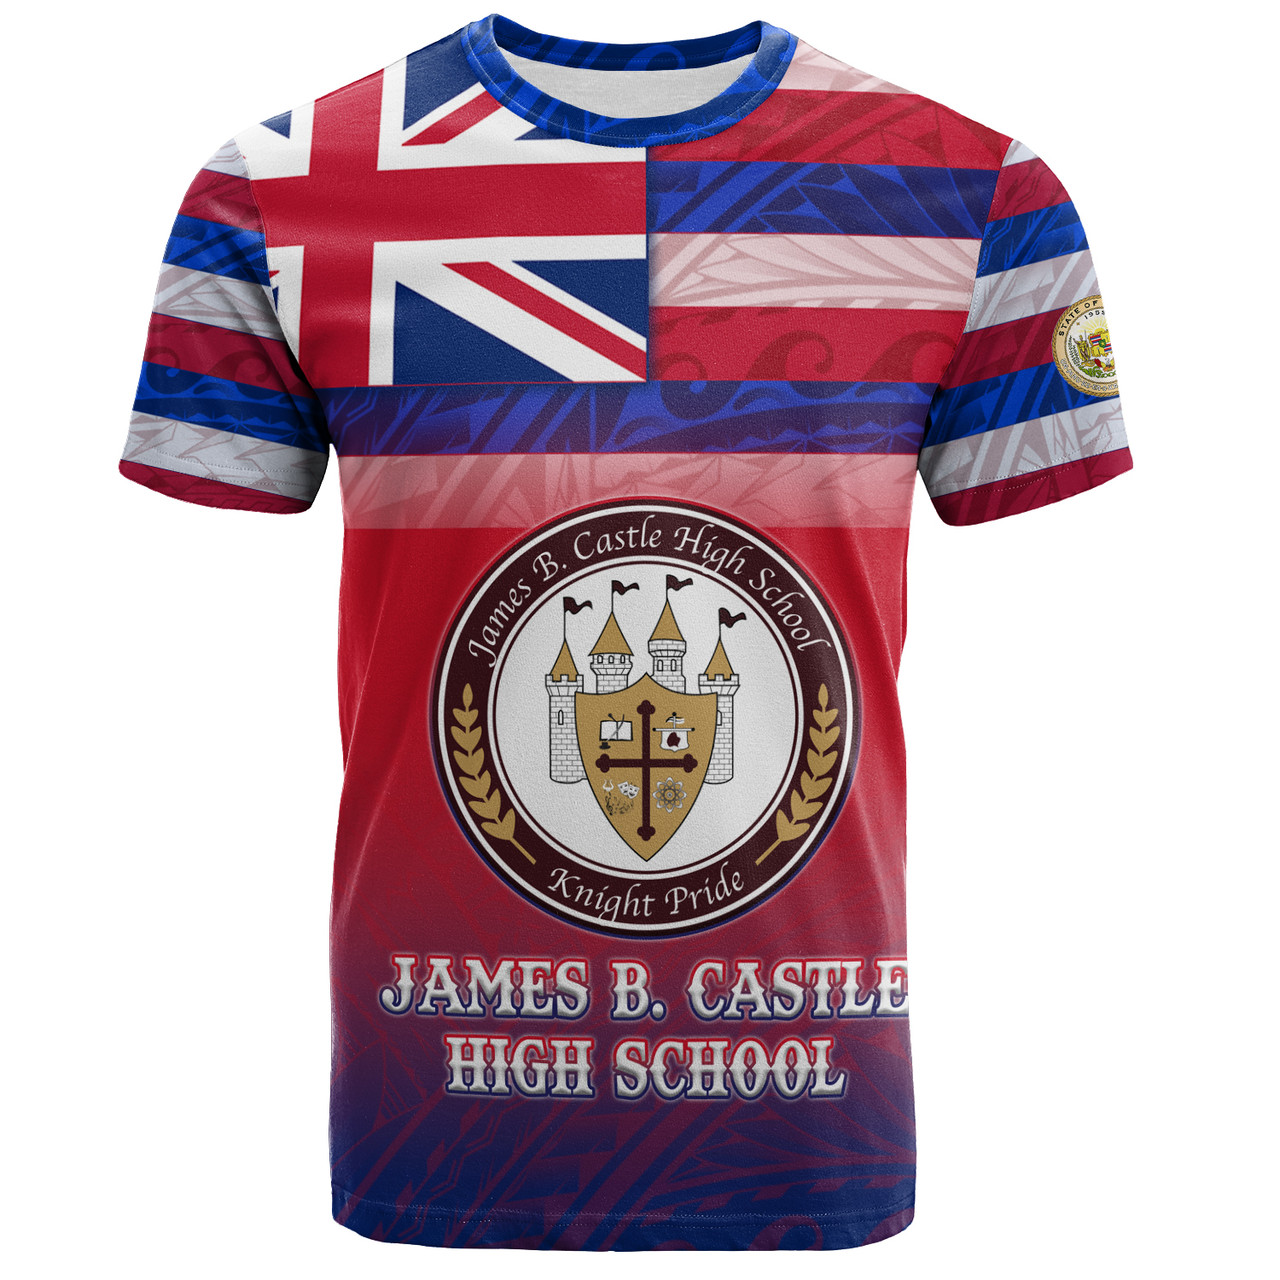 Hawaii James B. Castle High School T-Shirt Flag Color With Traditional Patterns